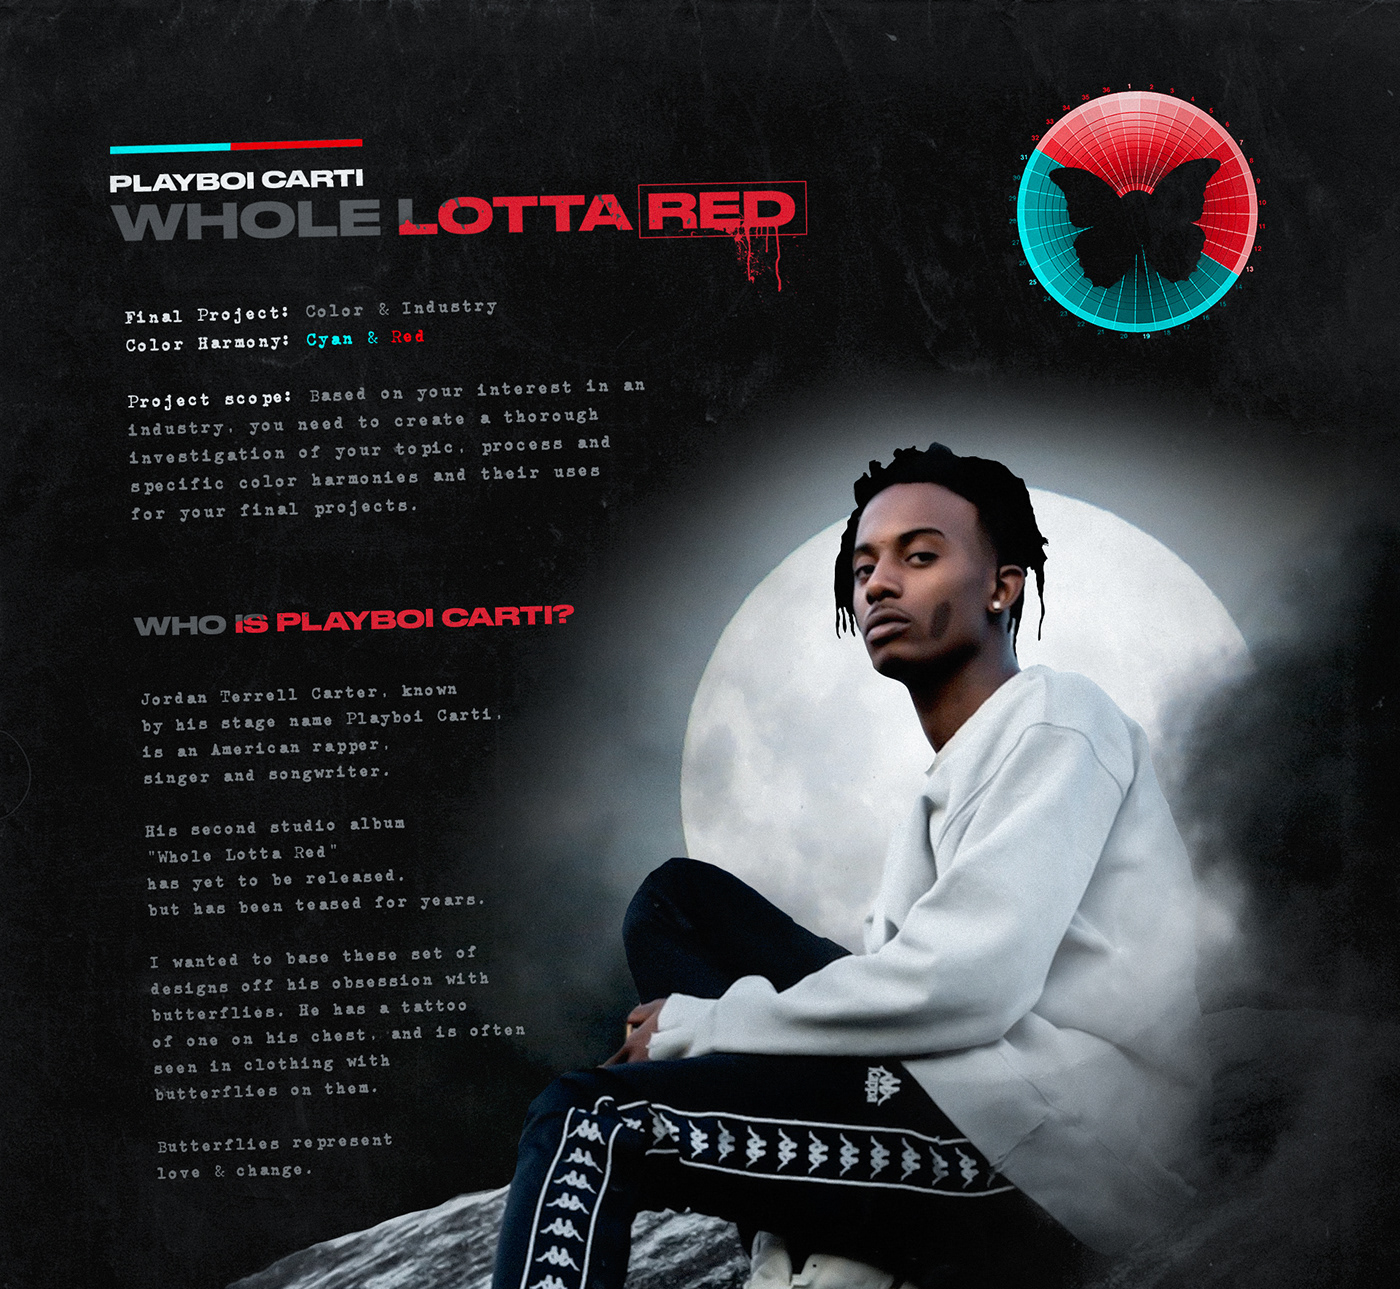 Everything We Know About Playboi Carti's New Album 'Whole Lotta Red